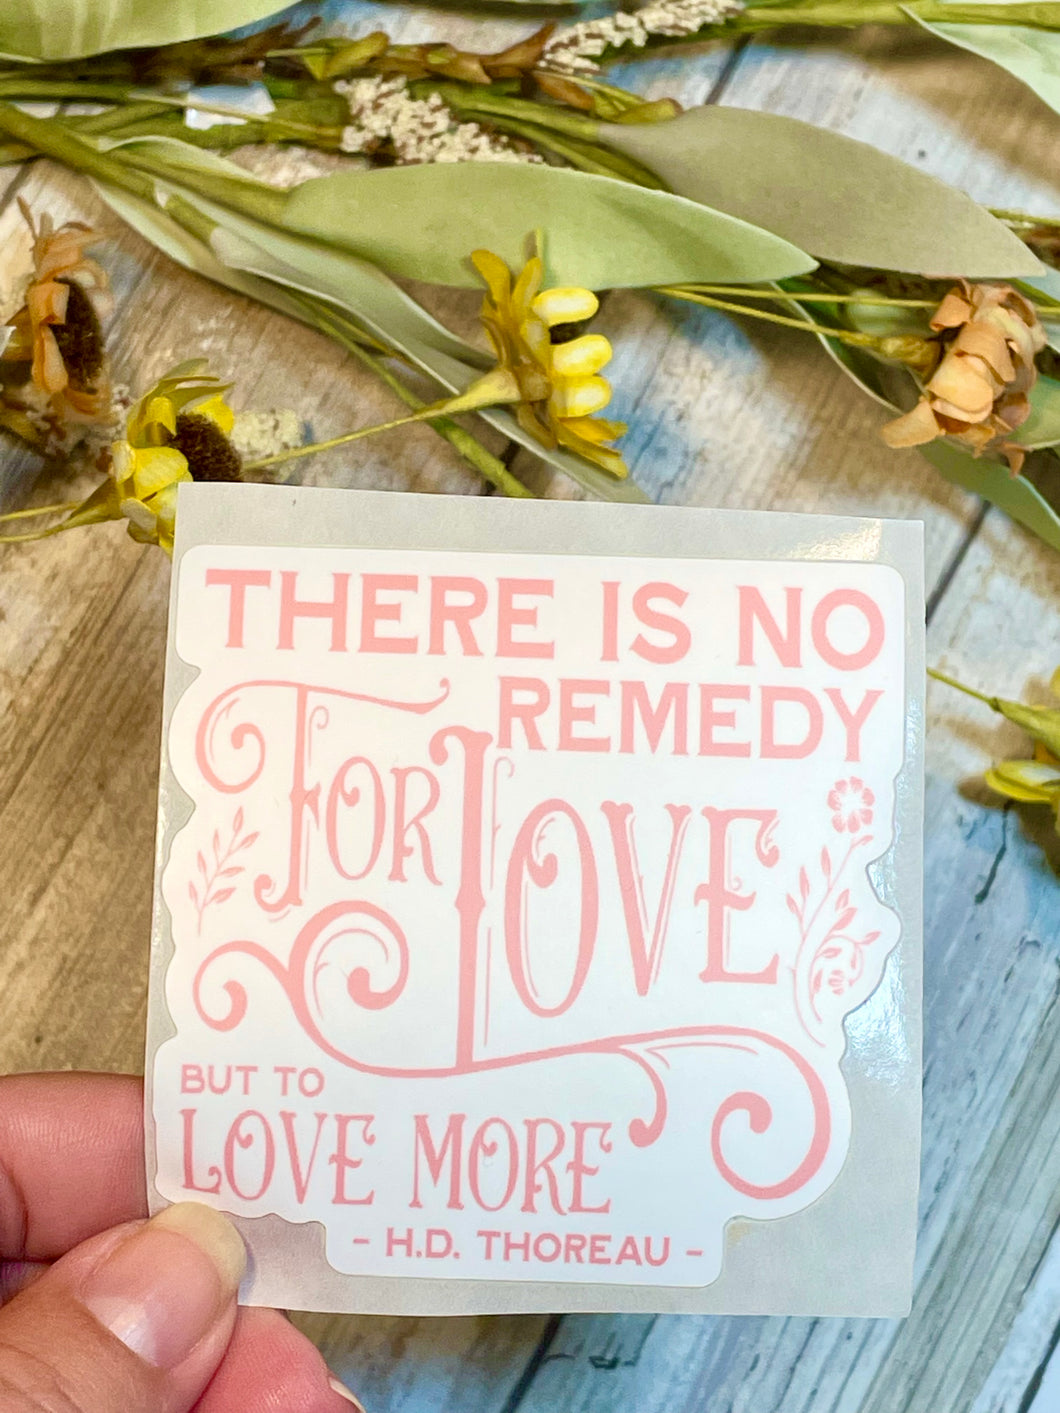 There is No Remedy for Love but More Love Thoreau Quote Vinyl Sticker, Hydroflask Sticker, Mental Health Decal